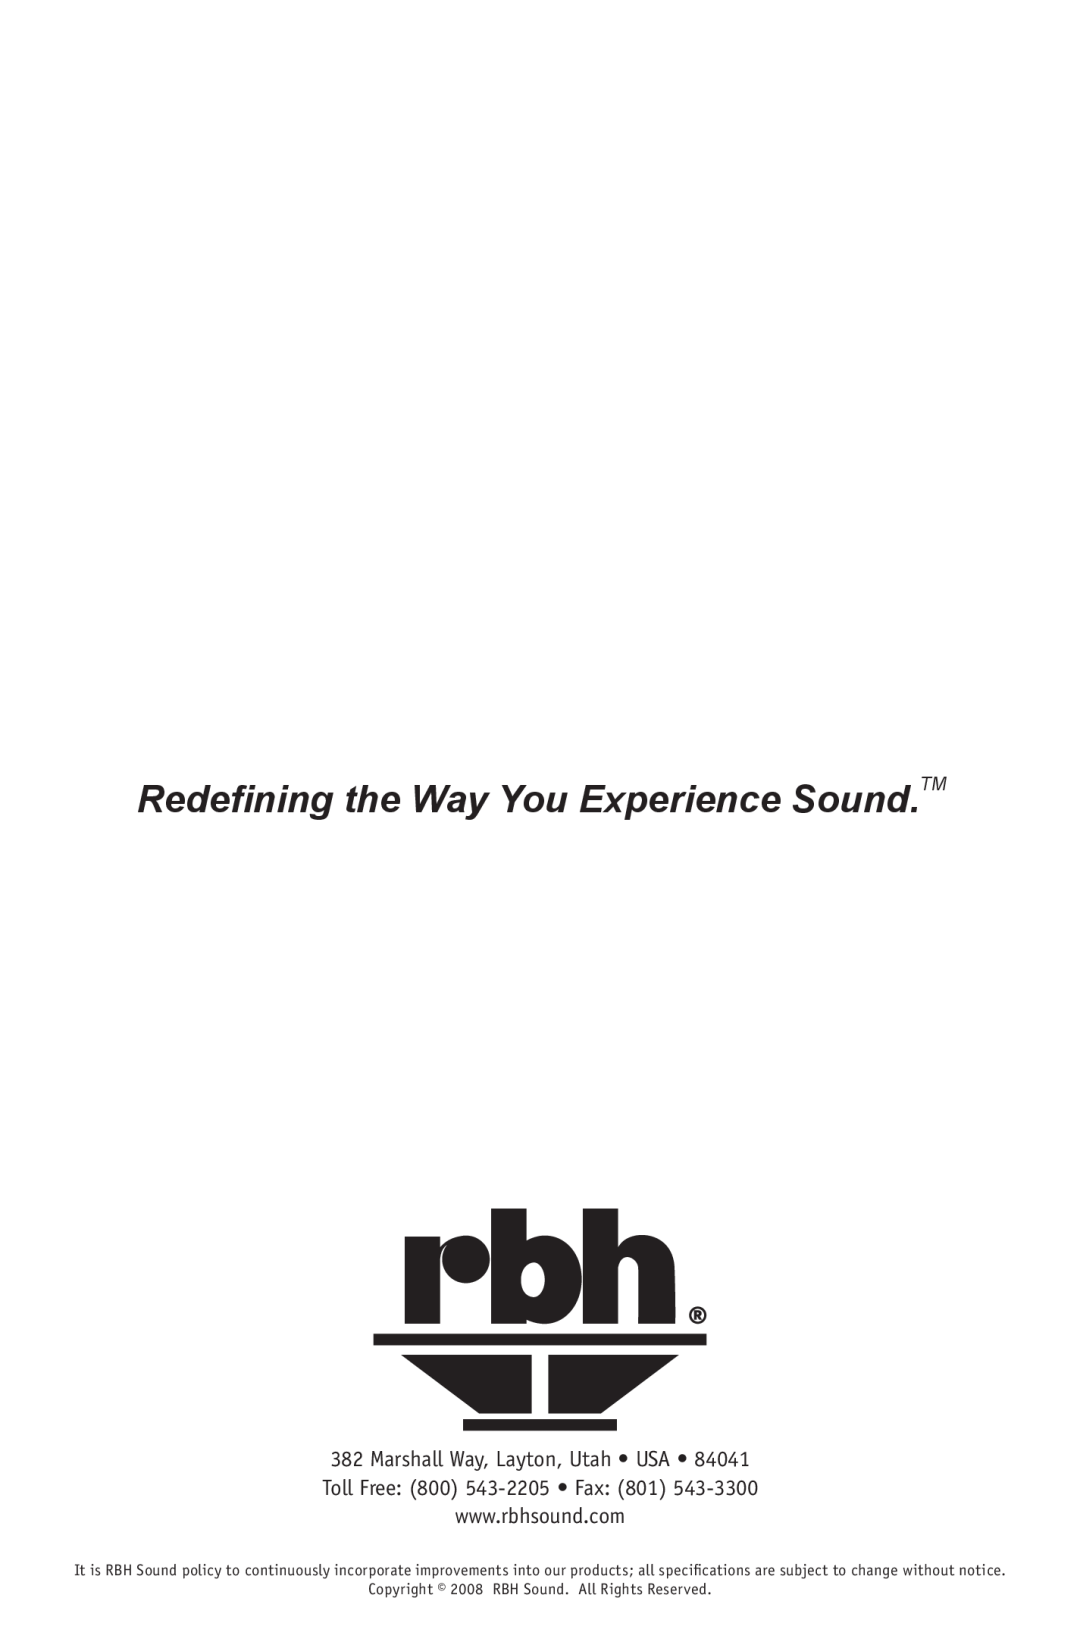 RBH Sound HS-615 owner manual Redefining the Way You Experience Sound.TM, Copyright 2008 RBH Sound. All Rights Reserved 